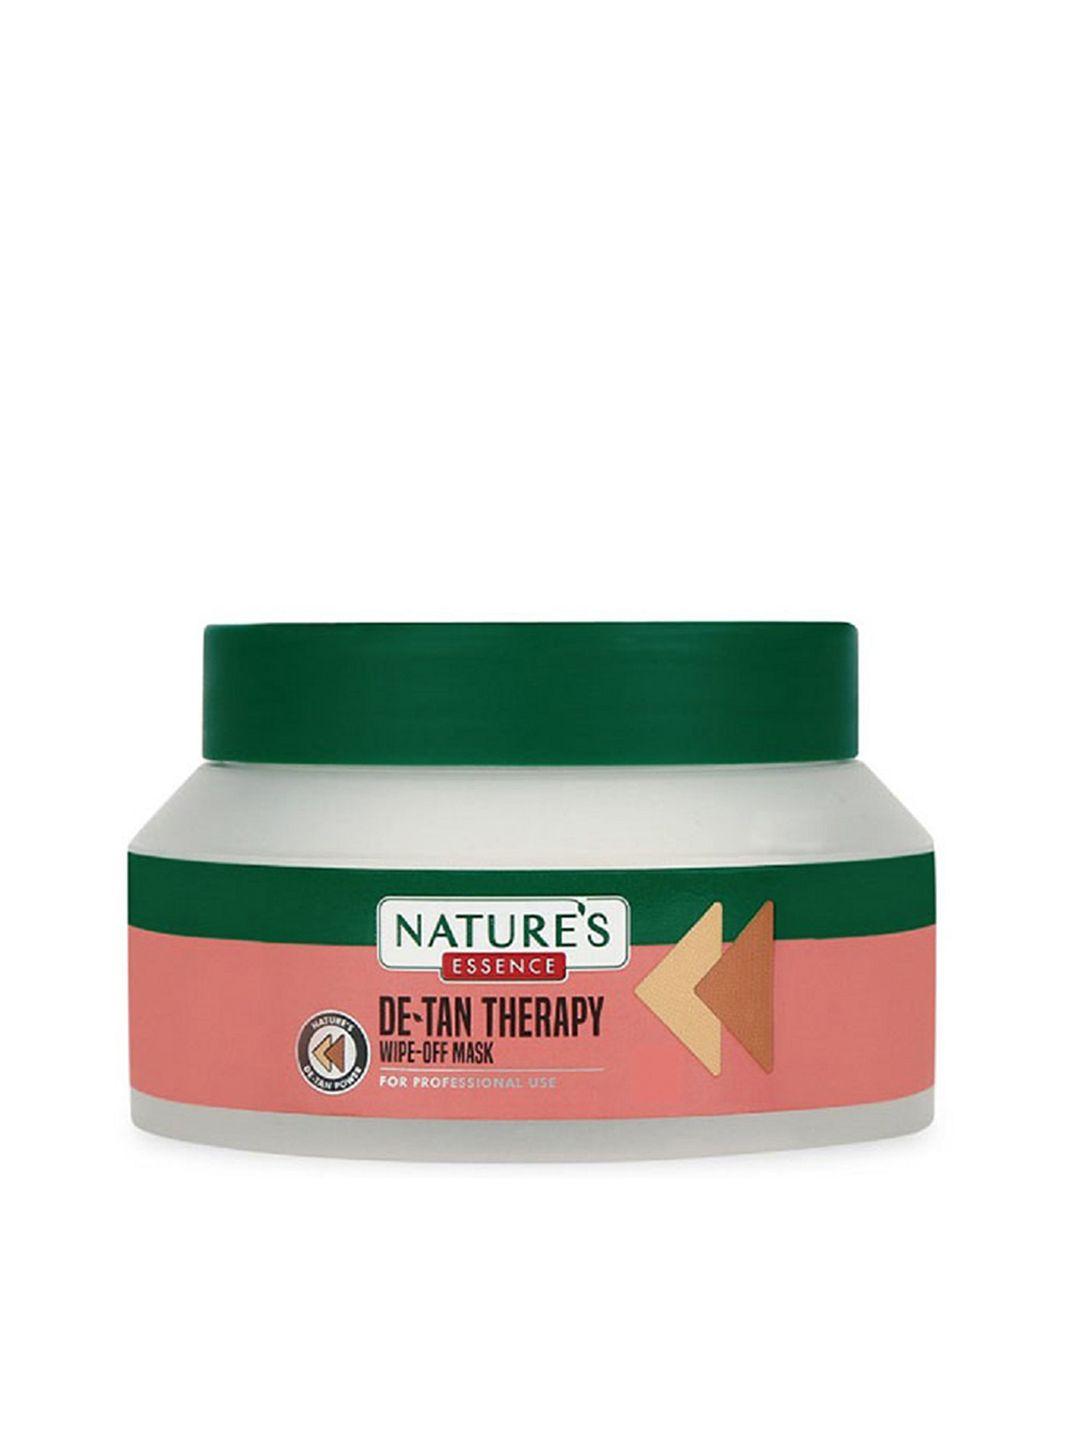 natures essence de-tan therapy wipe-off mask - 500g